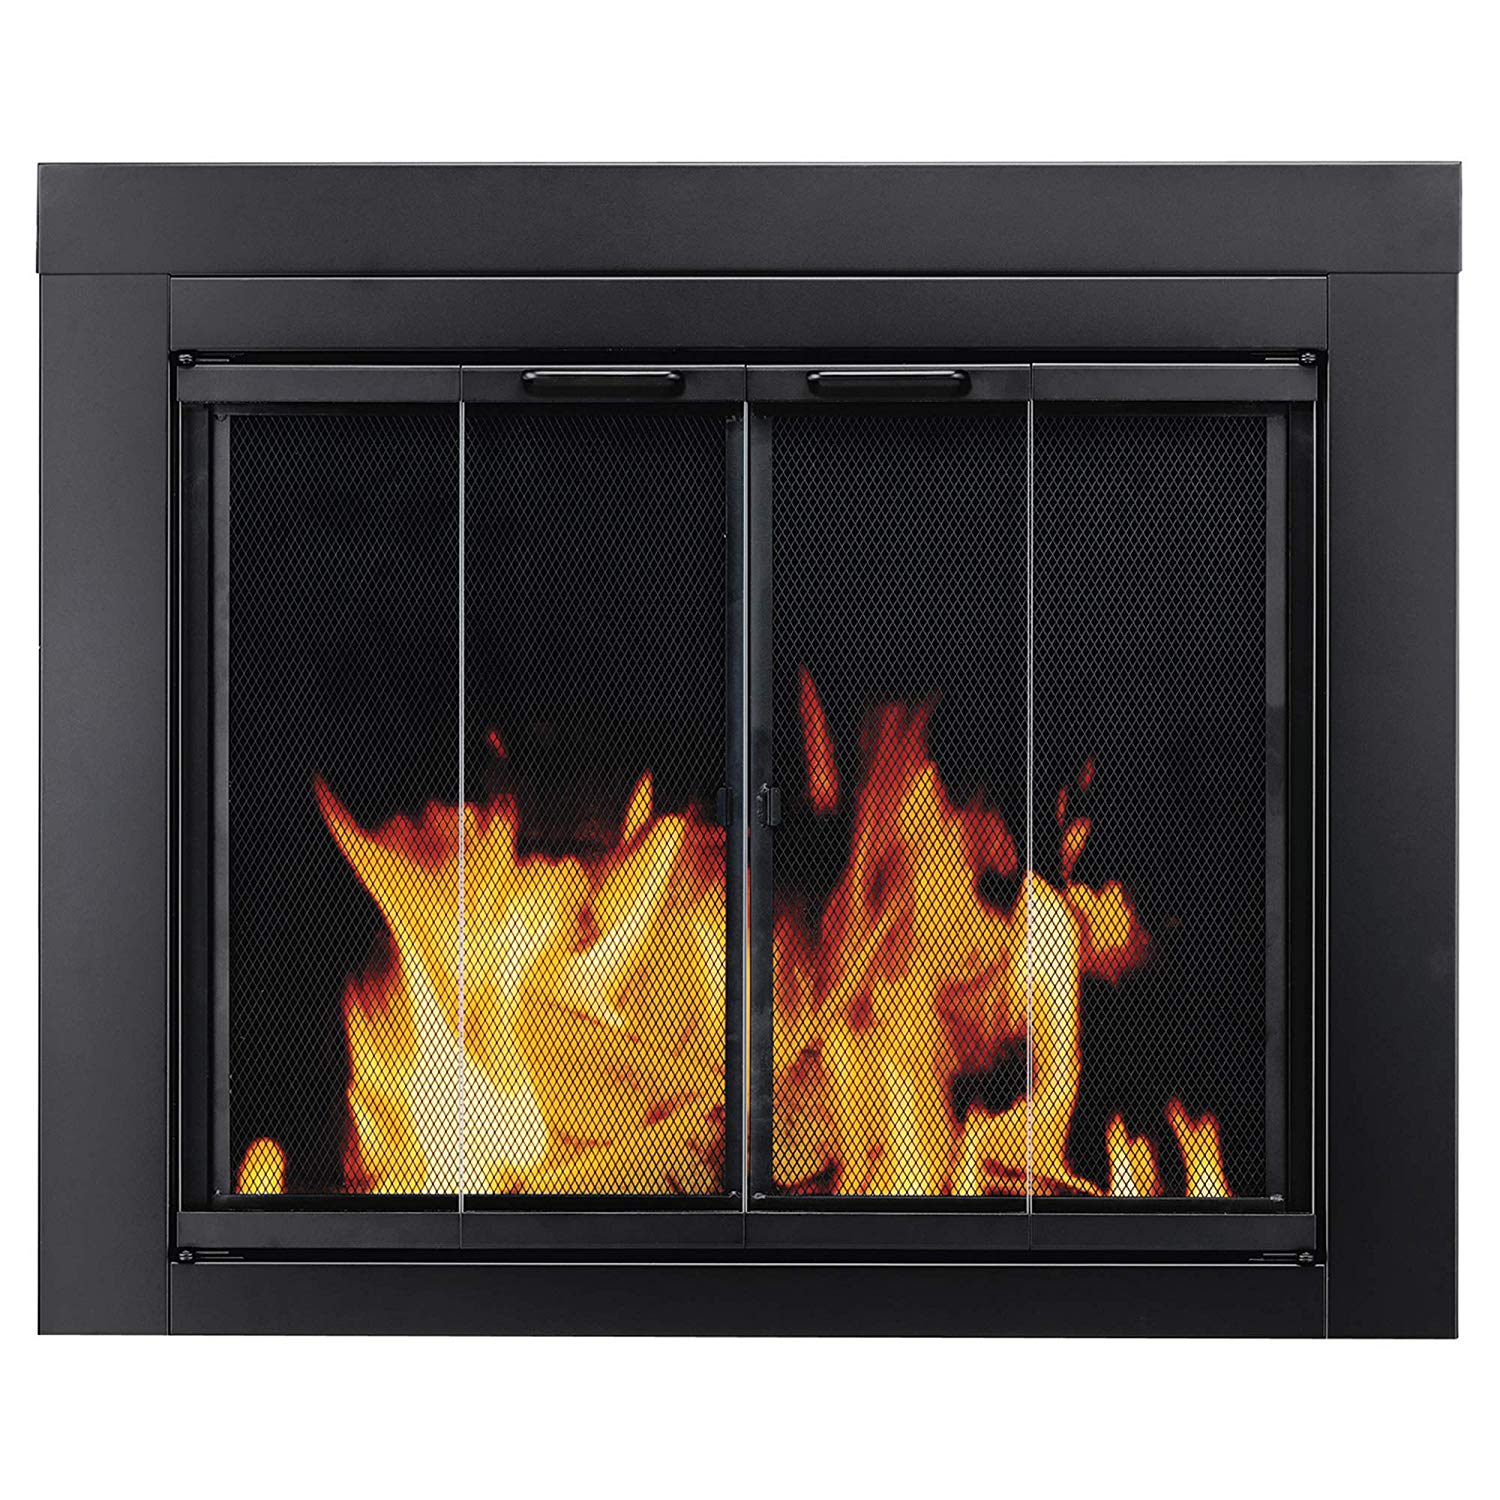 Round Fireplace Luxury Pleasant Hearth at 1000 ascot Fireplace Glass Door Black Small